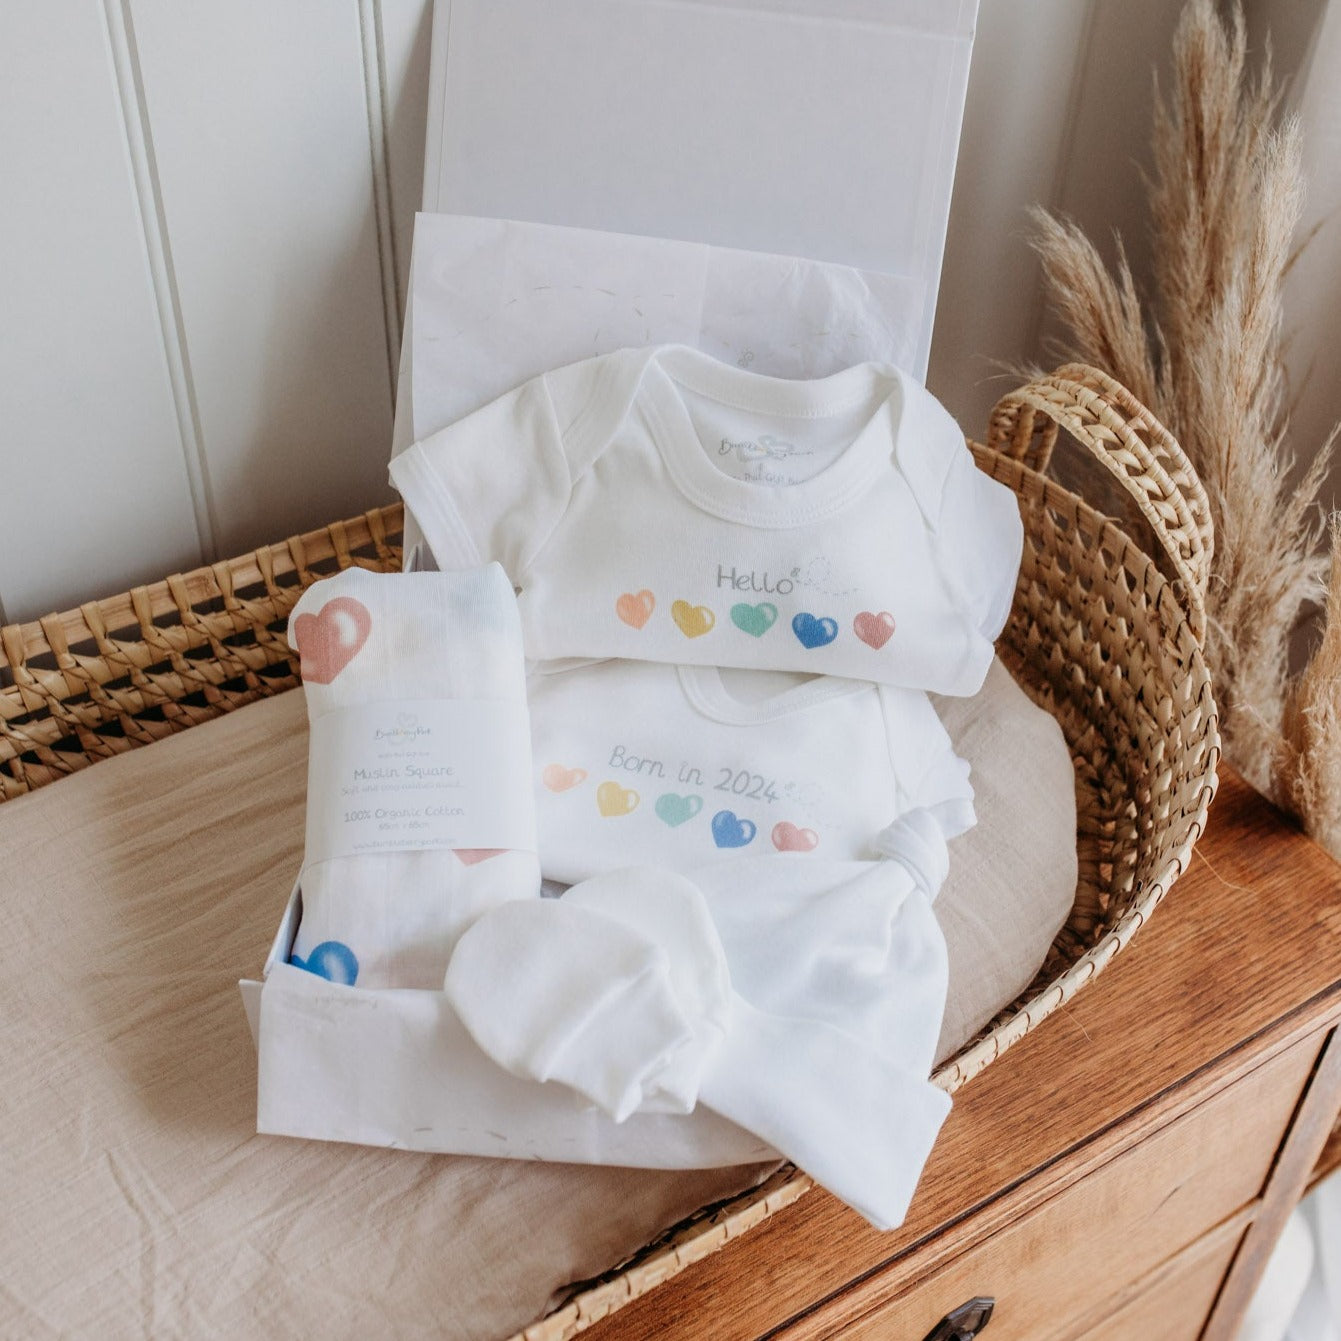 born in 2024 love hearts new baby starter gift set with baby sleepsuit, bodysuit, hat mittens and muslin square with a rainbow colour bright heart design in a luxury white gift box